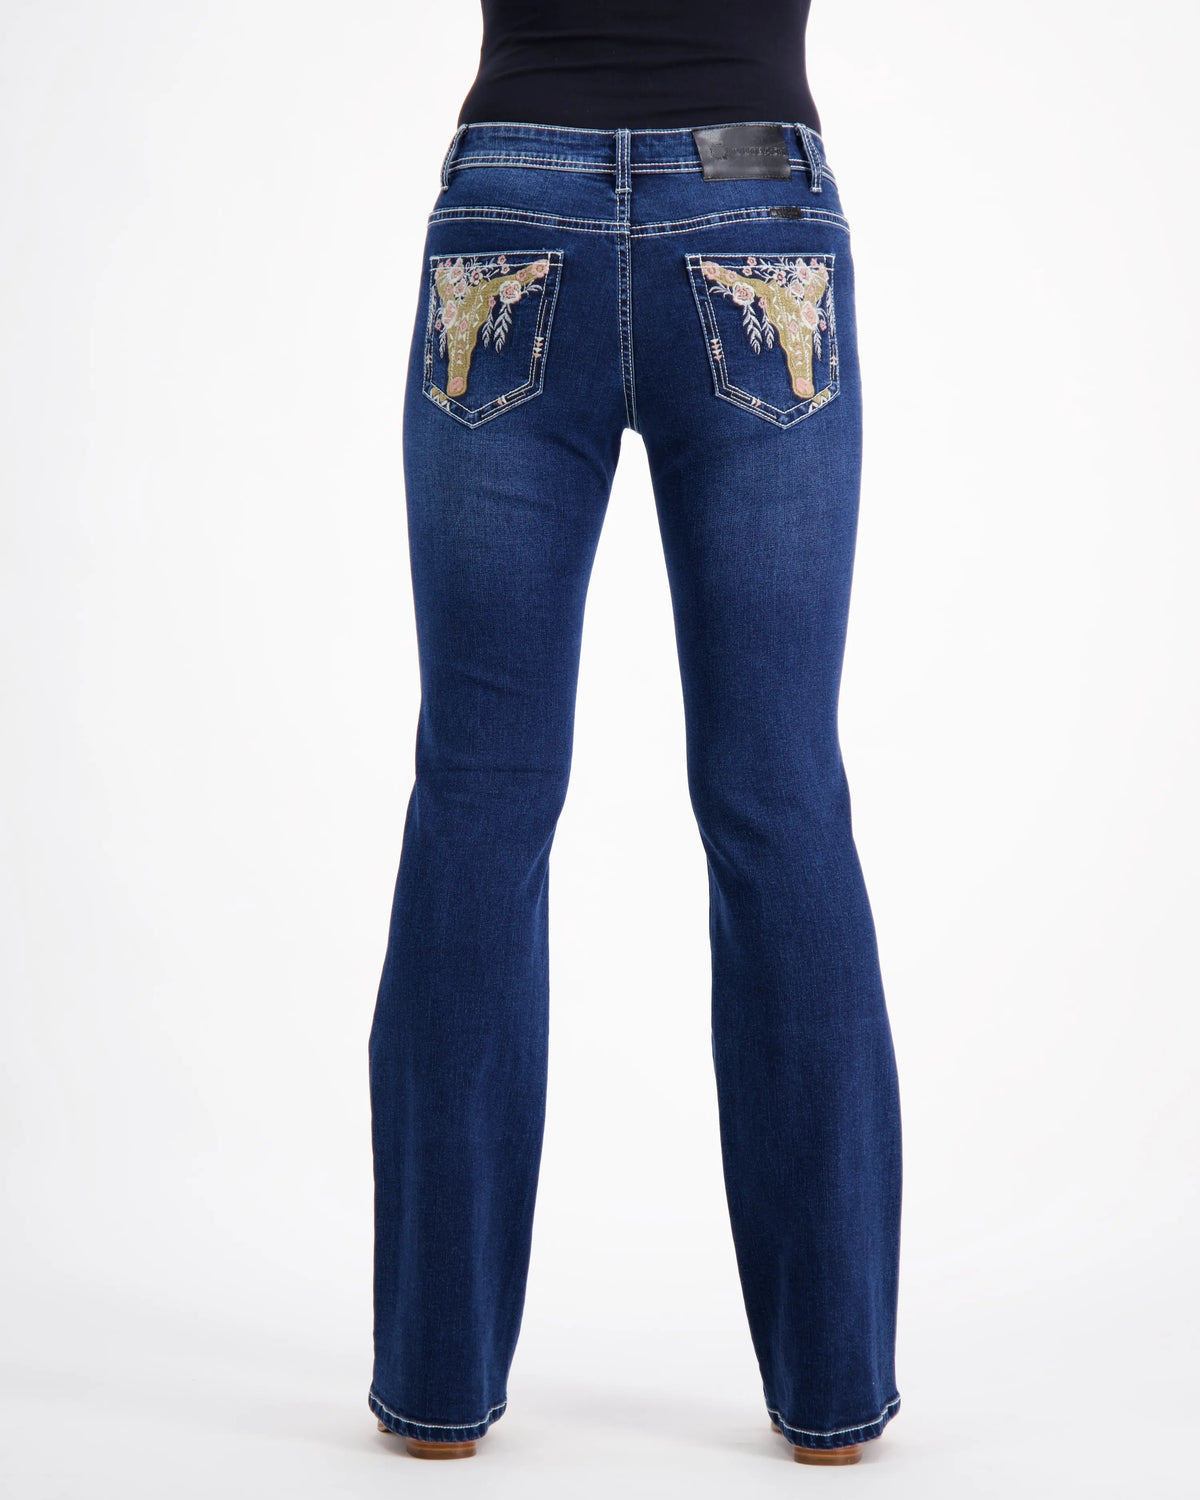 Stretch Denim Jeans Outback Supply Co Western Style